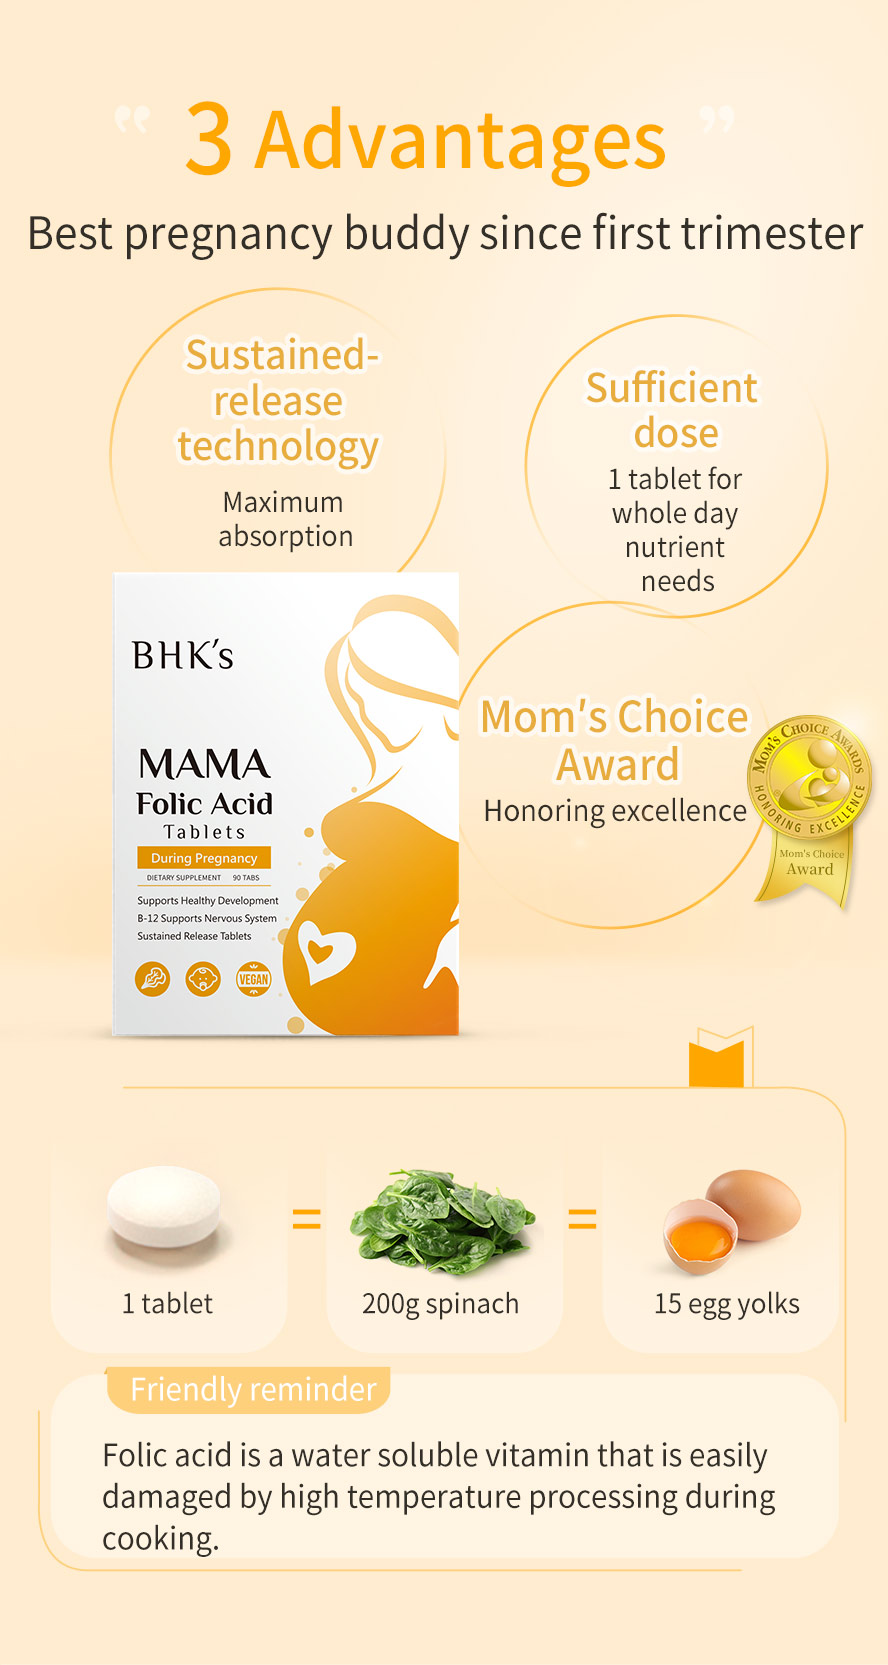 Suffient dosage to fulfill folic acid nutrient requirements, with exclusive sustained release technology tablet to enhance absorption